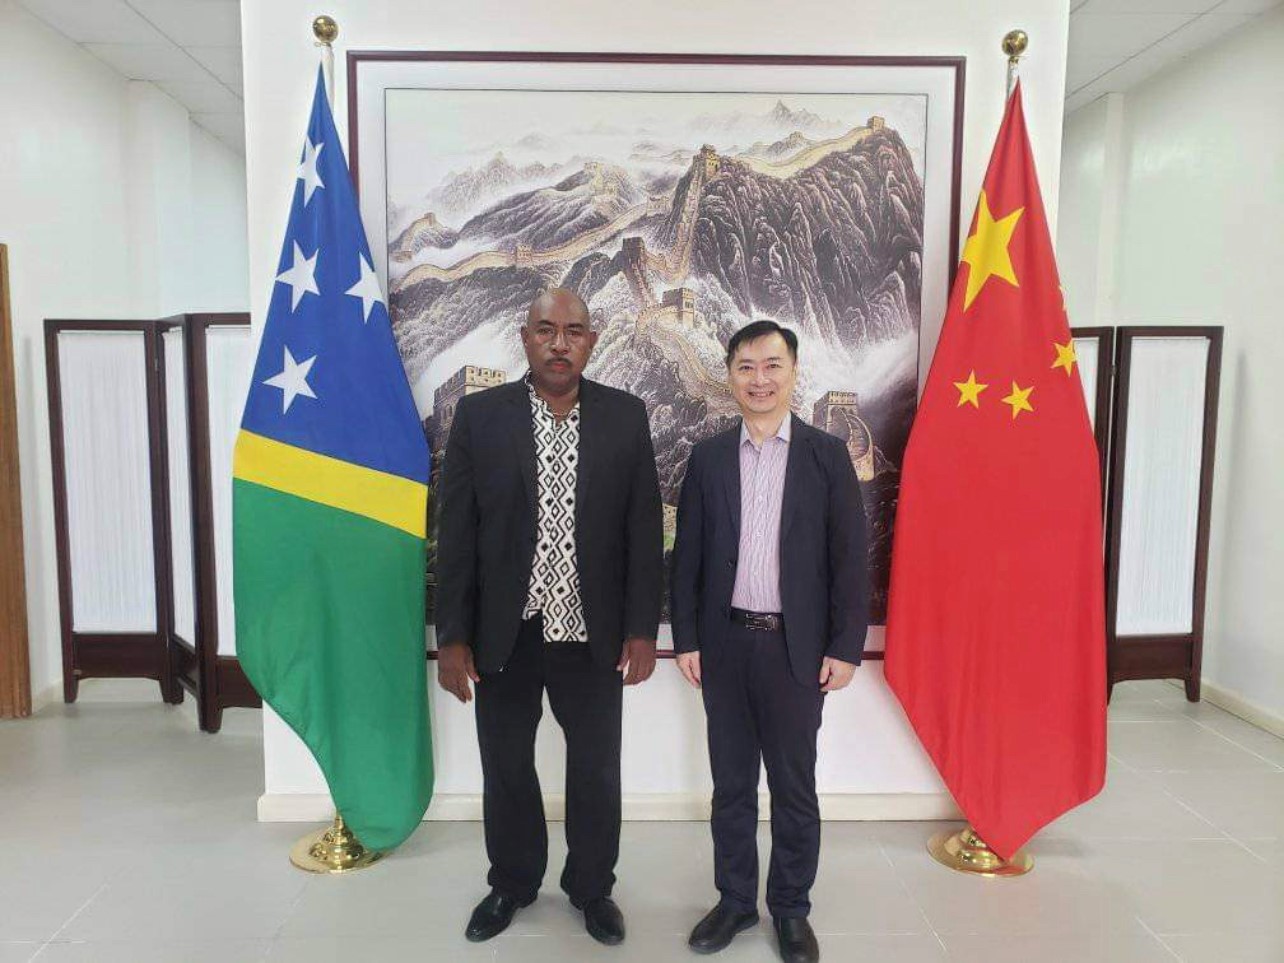 MP for Lau-Baelelea Meets with Chinese Ambassador to Strengthen Bilateral Relations